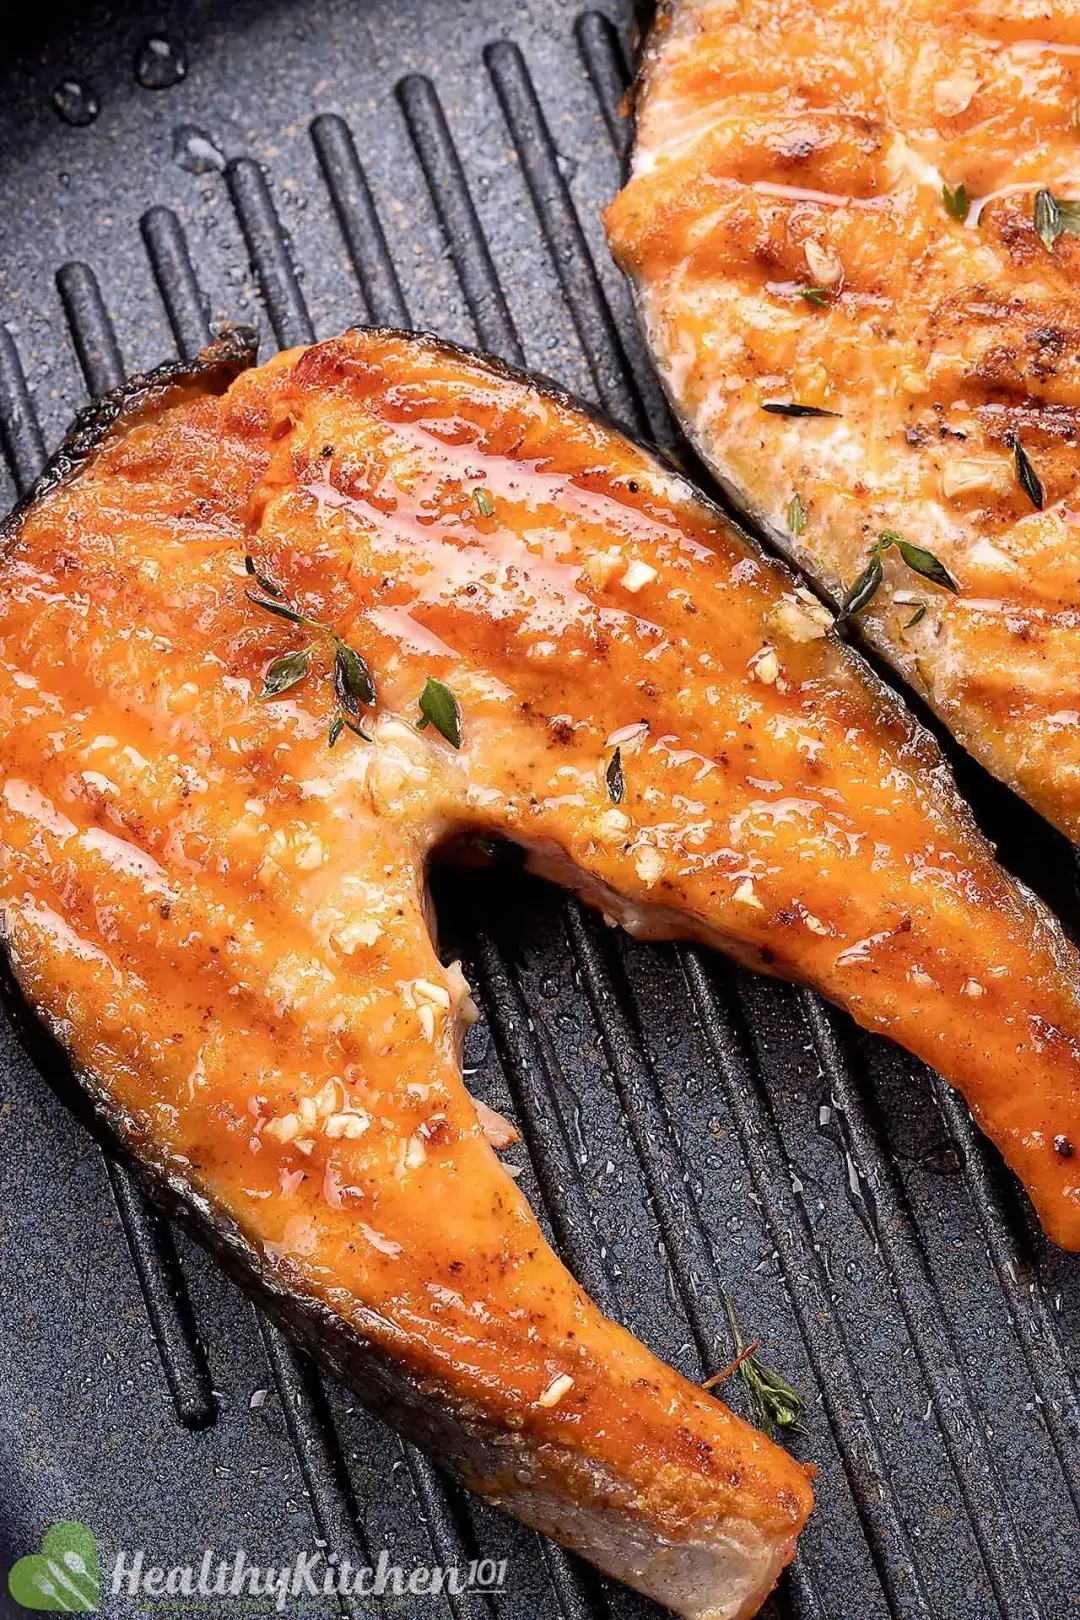 Two slices of salmon steak sizzling on a grill pan